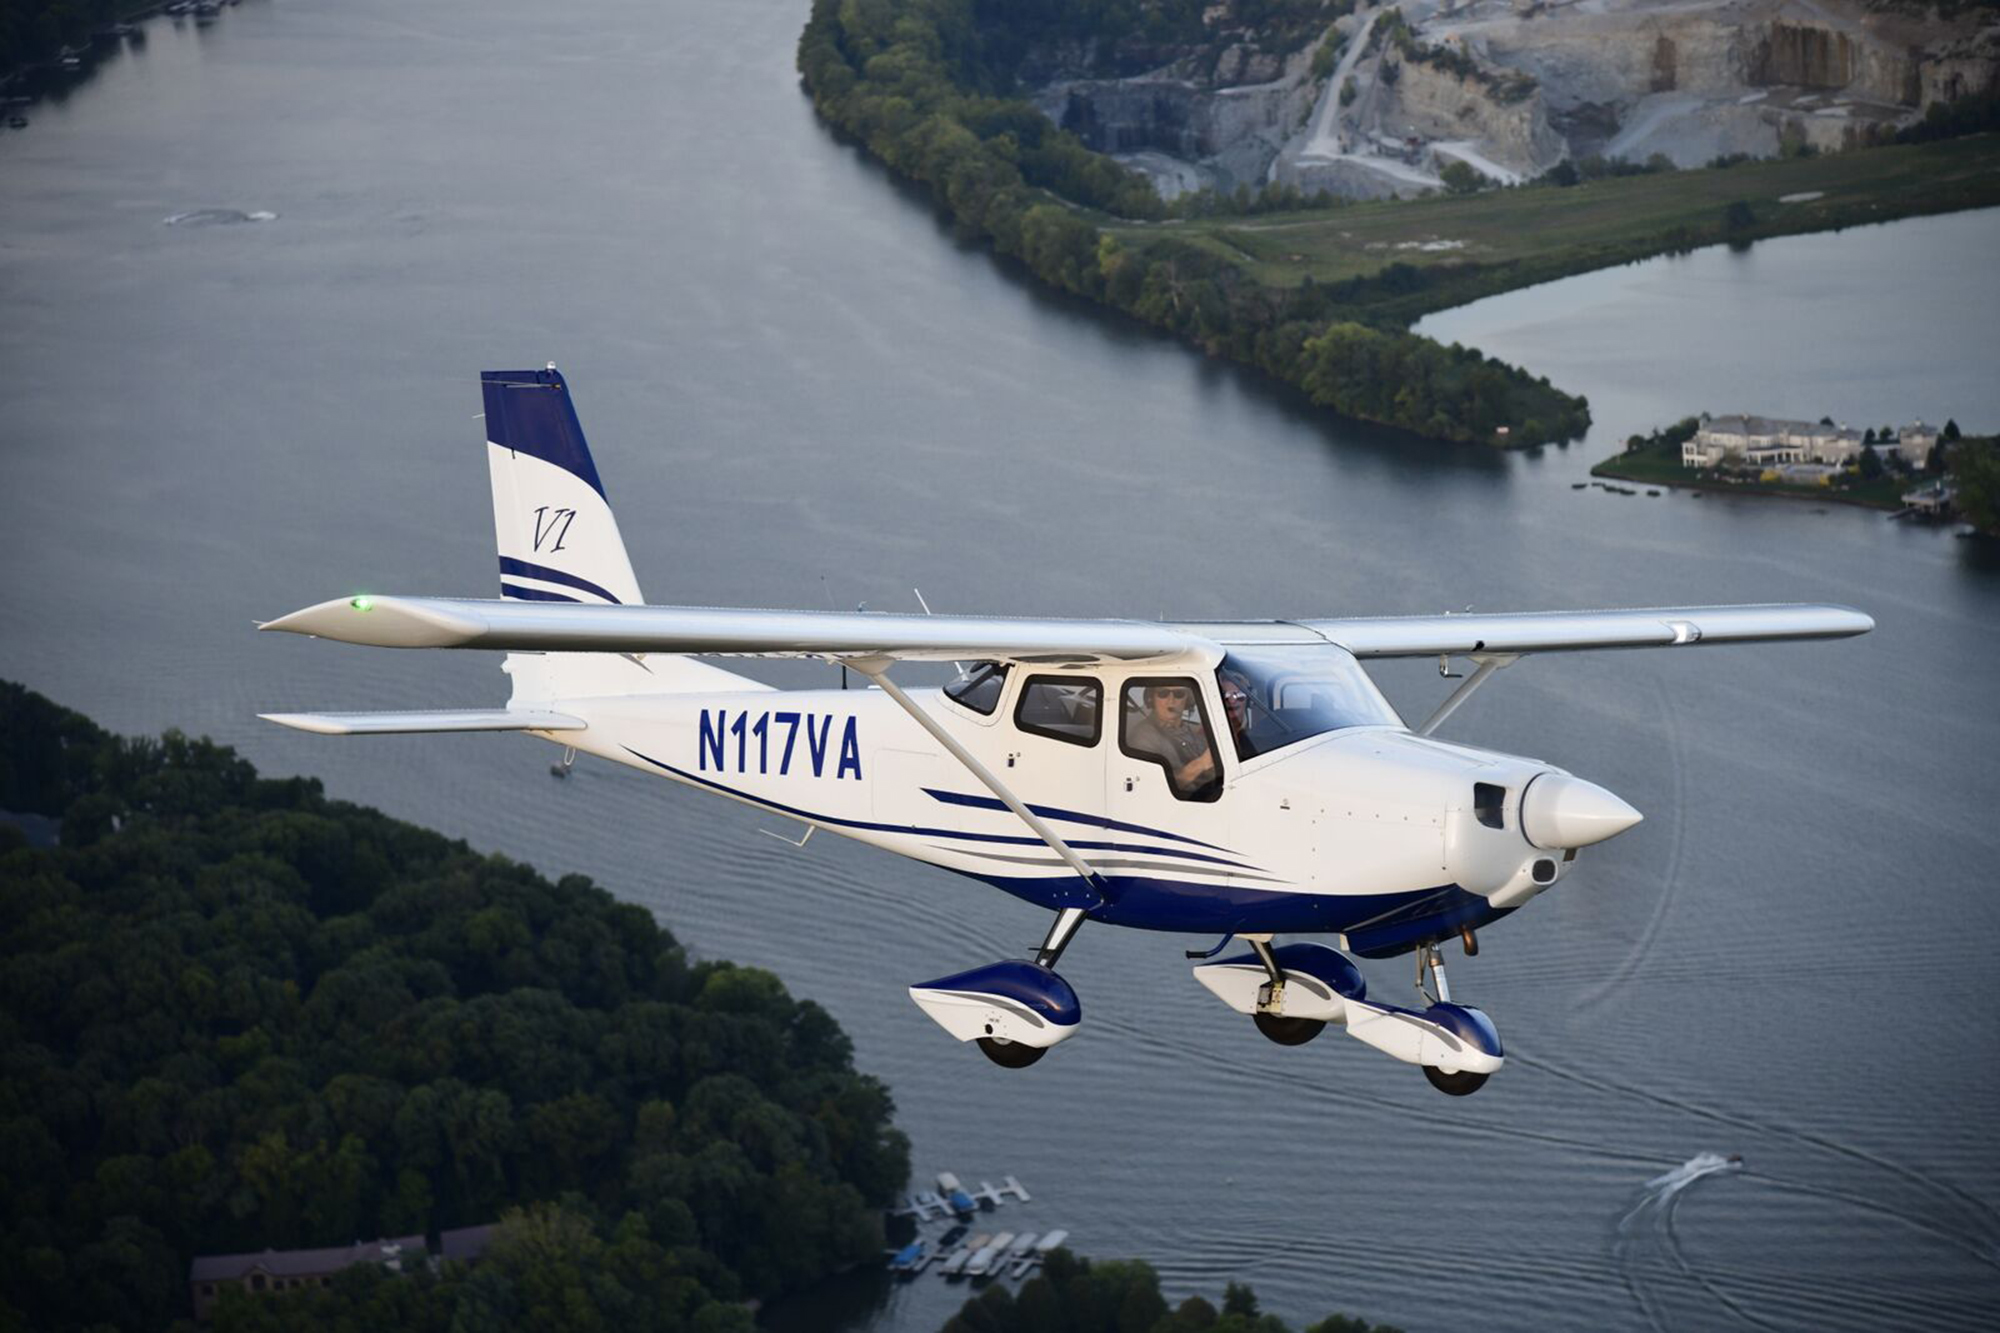 The University's Aviation Program is expanding its fleet with 10 of the pictured 10 Vulcanair V1.0 aircraft.